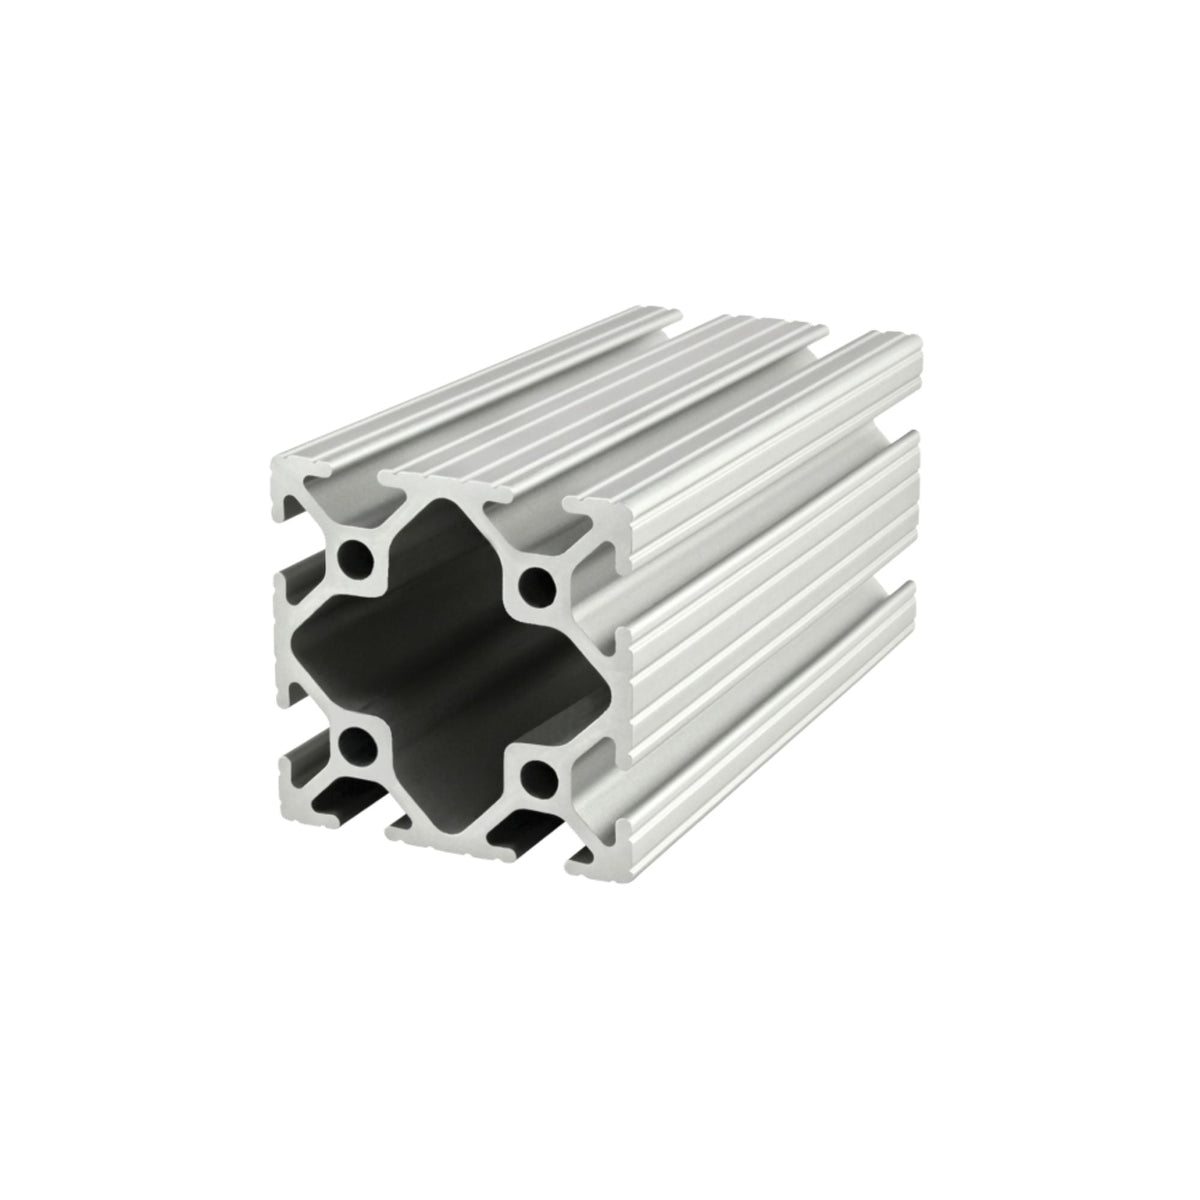 front side view of a metal bar with square edges and two T-slots on each of the four sides